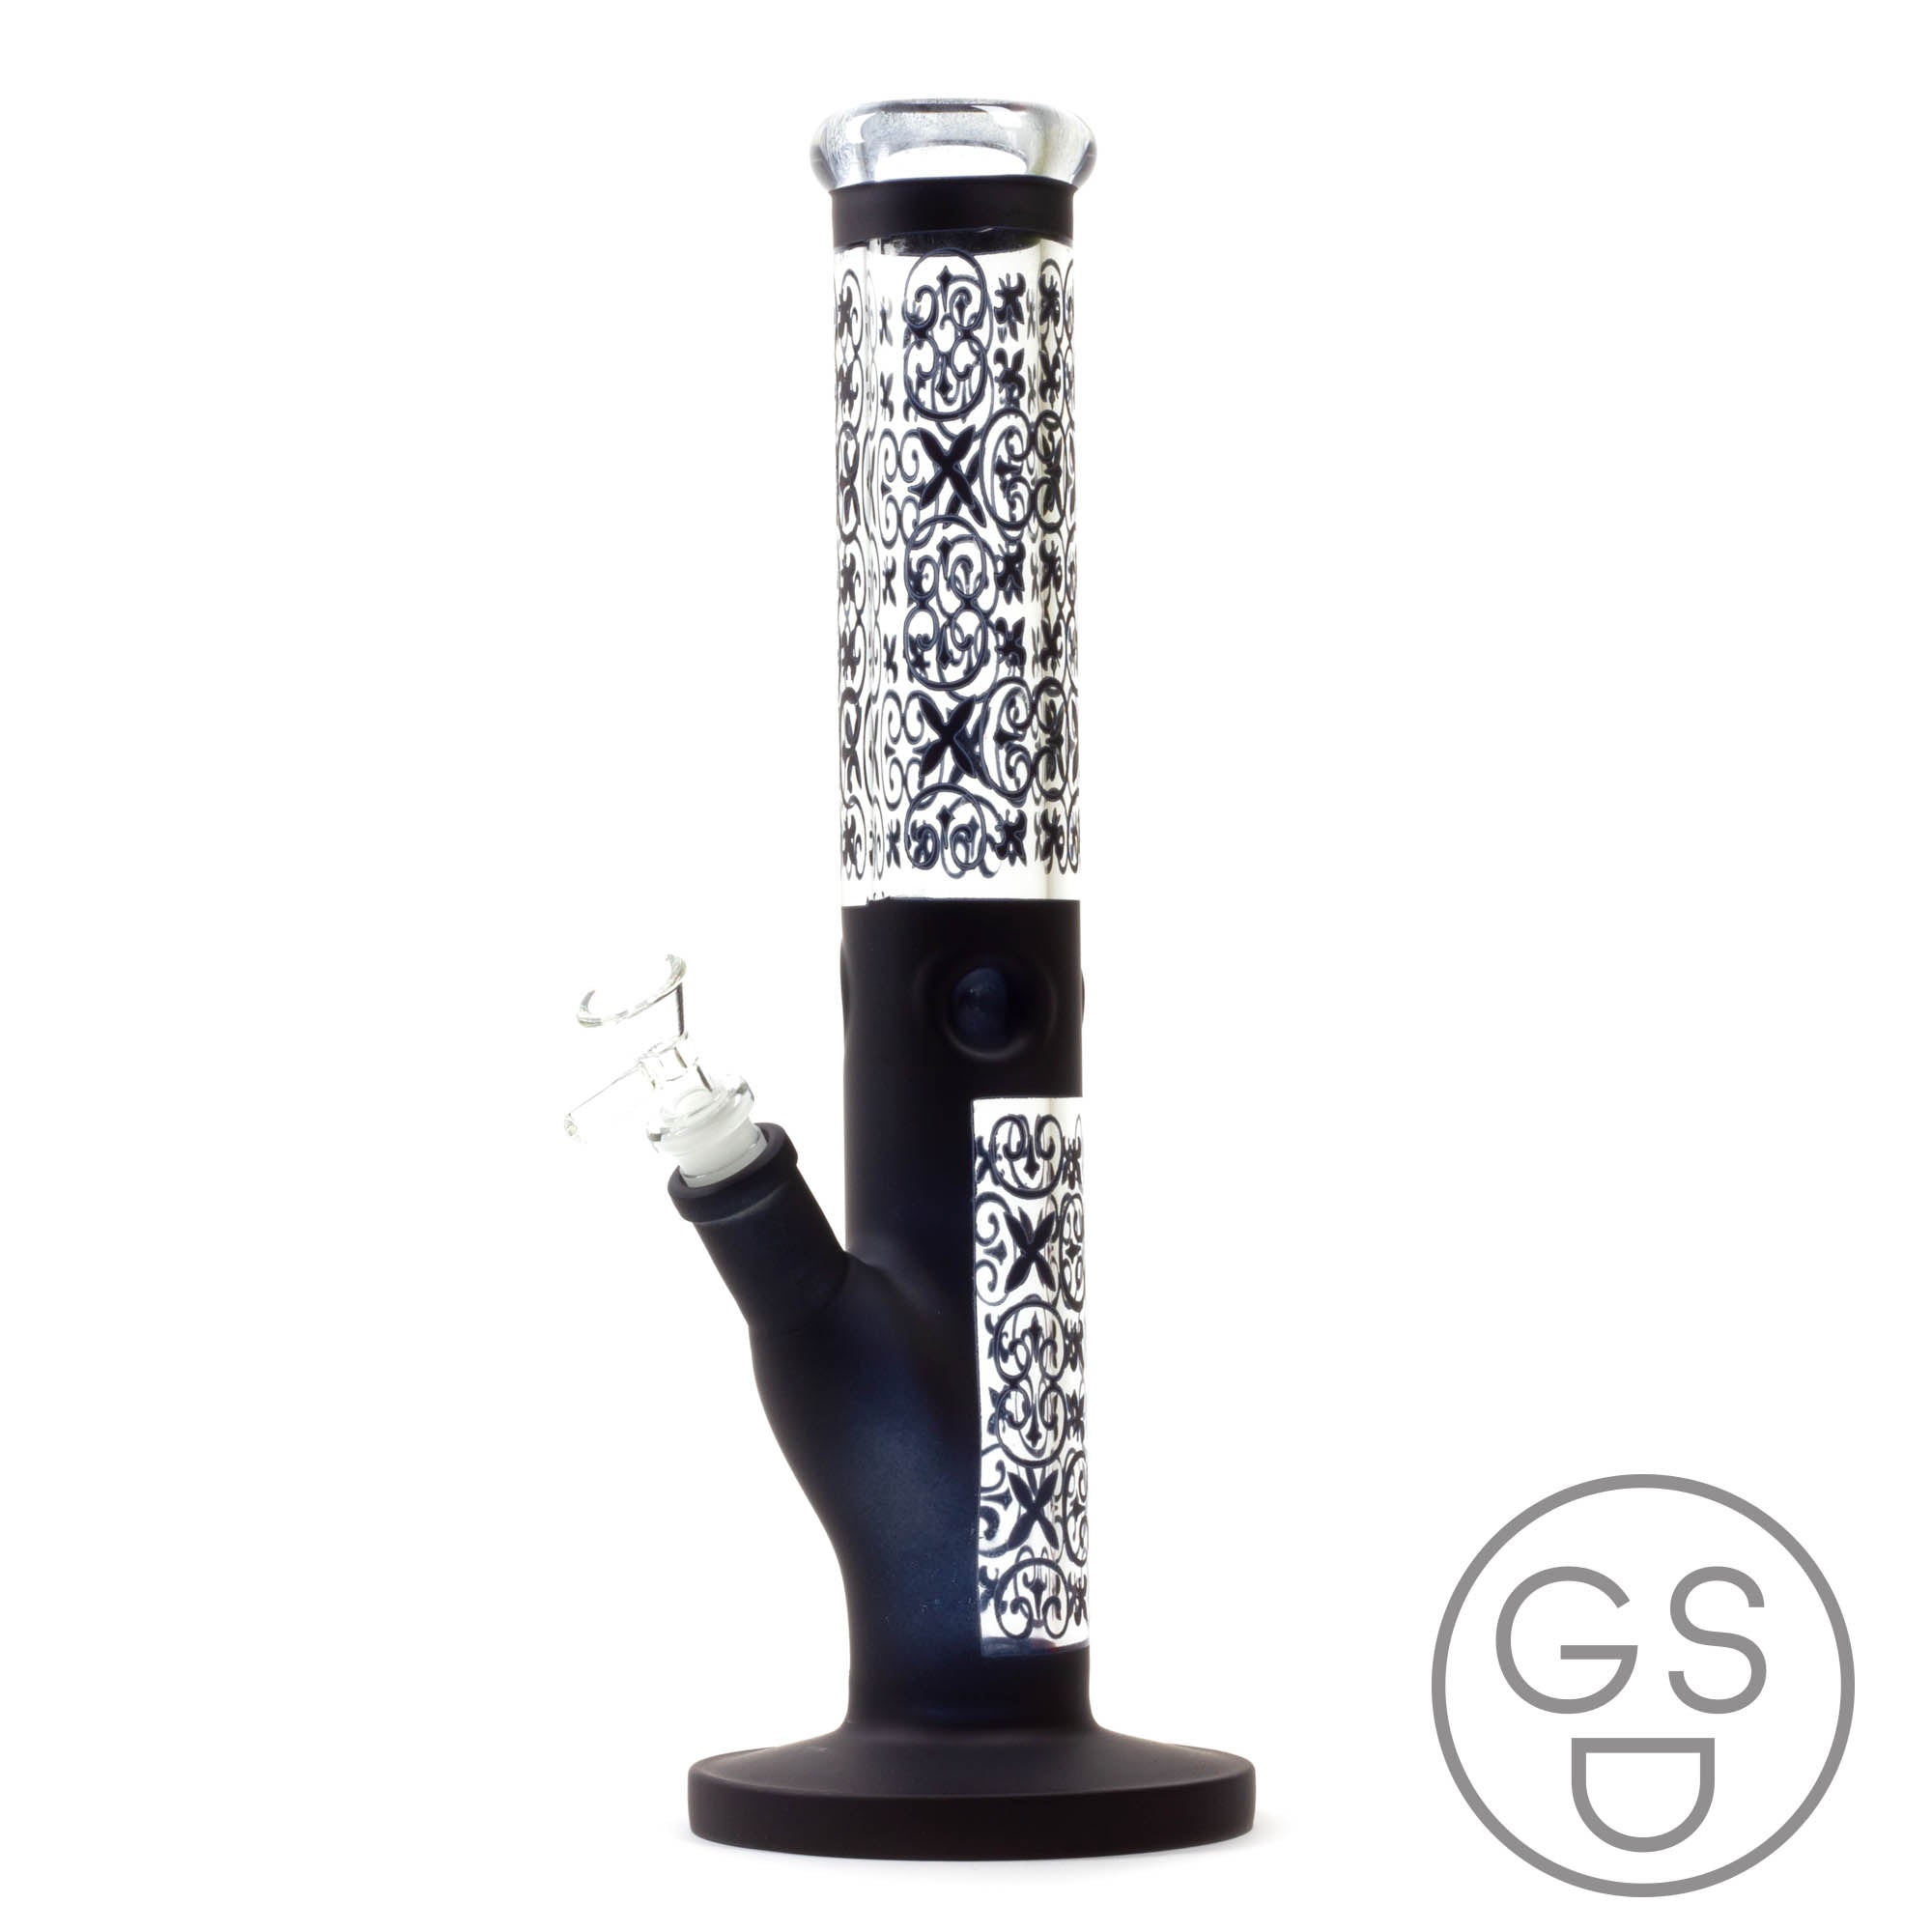 Laced Tower Waterpipe